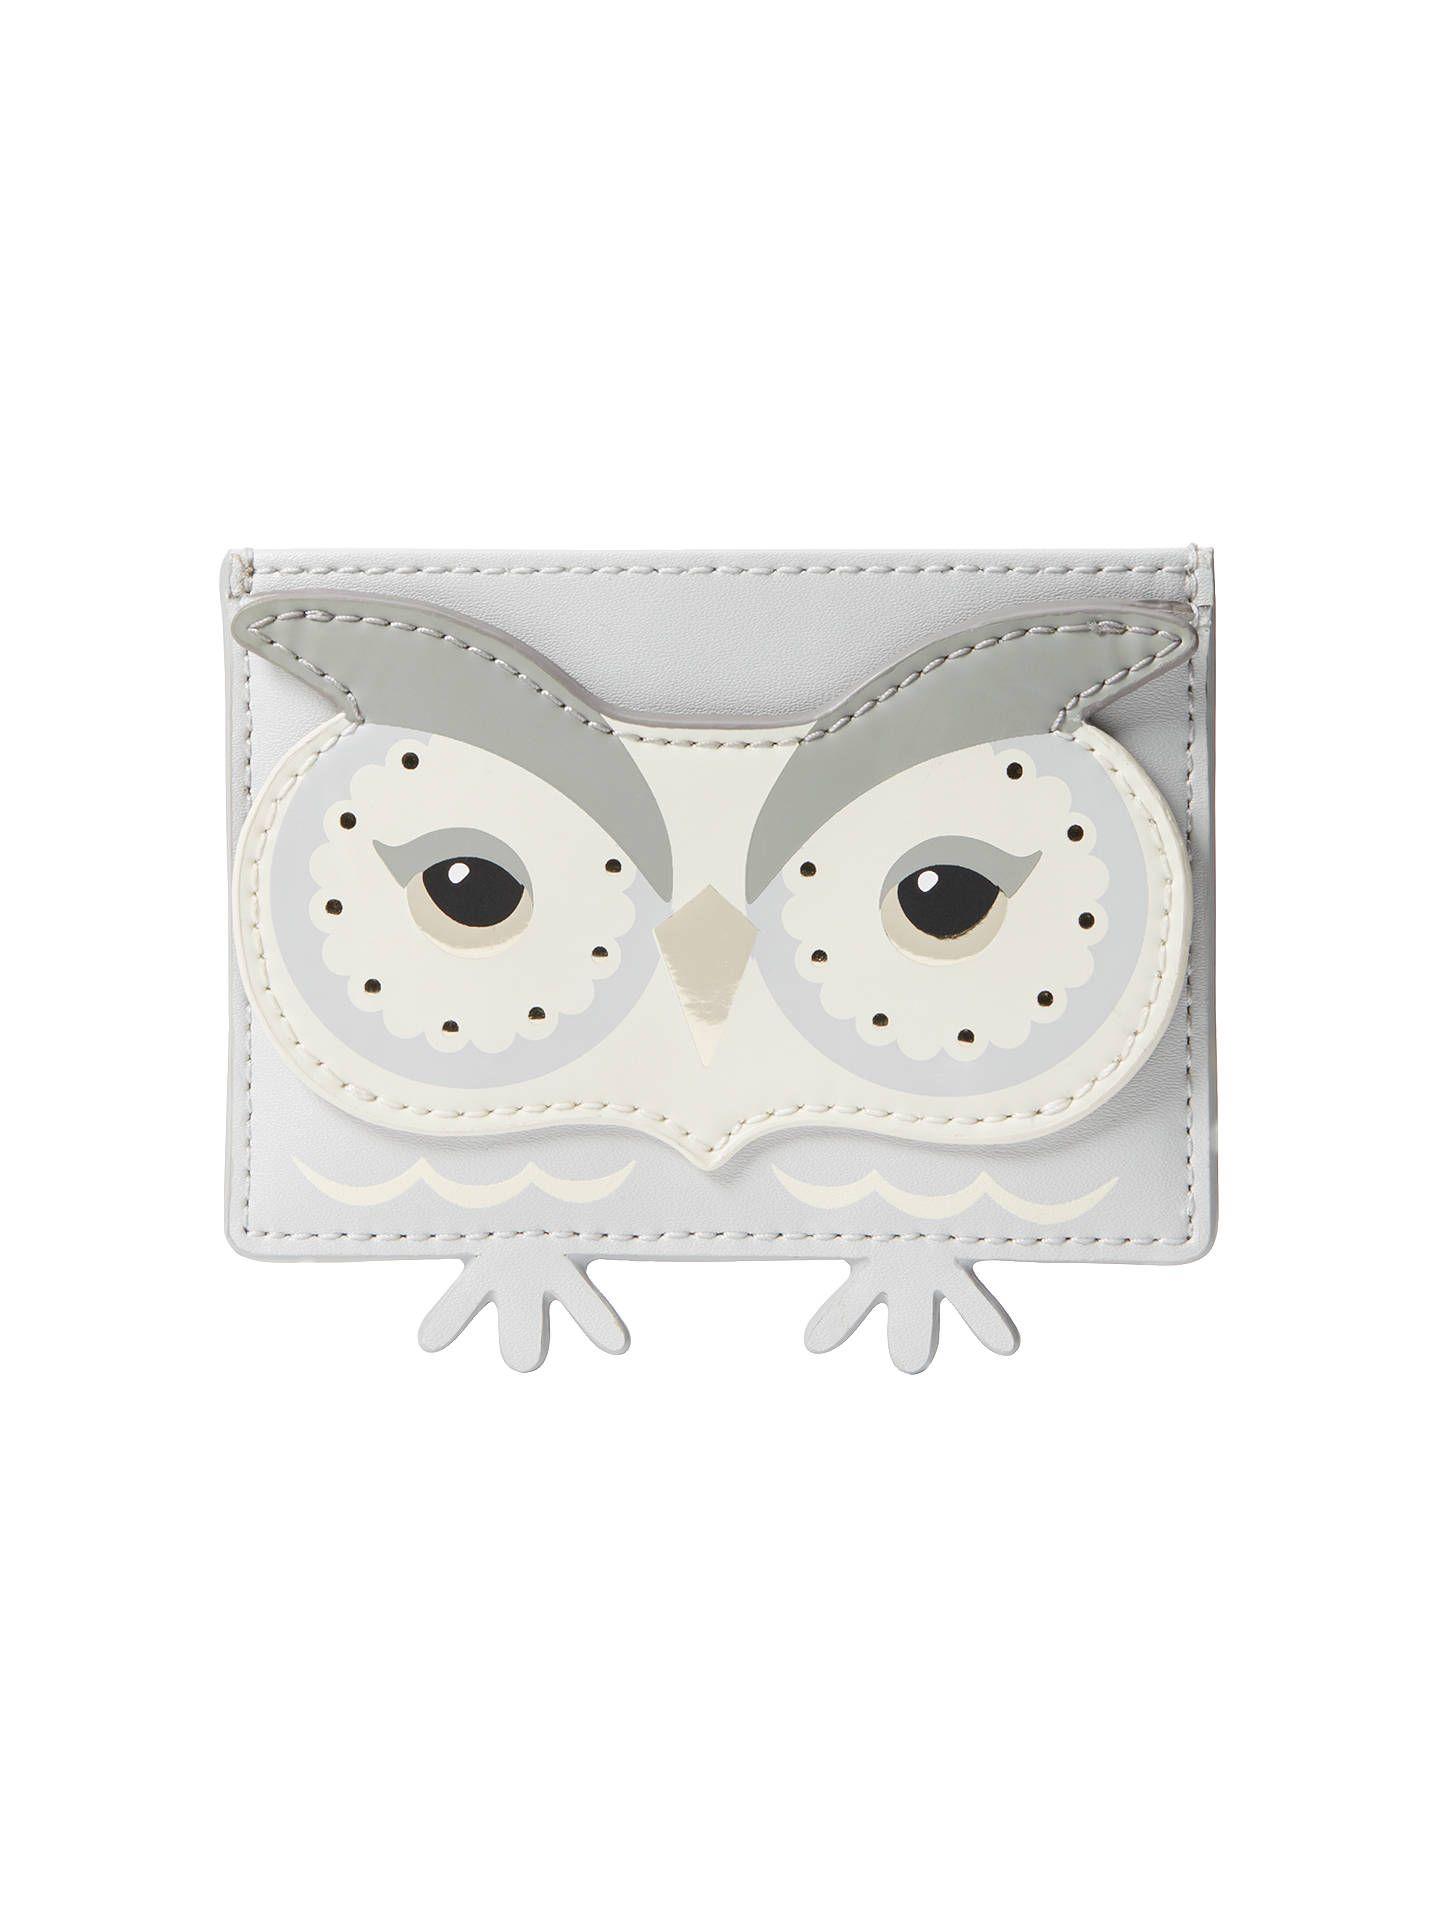 Spade with White Star Logo - kate spade new york Star Bright Owl Leather Card Holder, Multi at ...